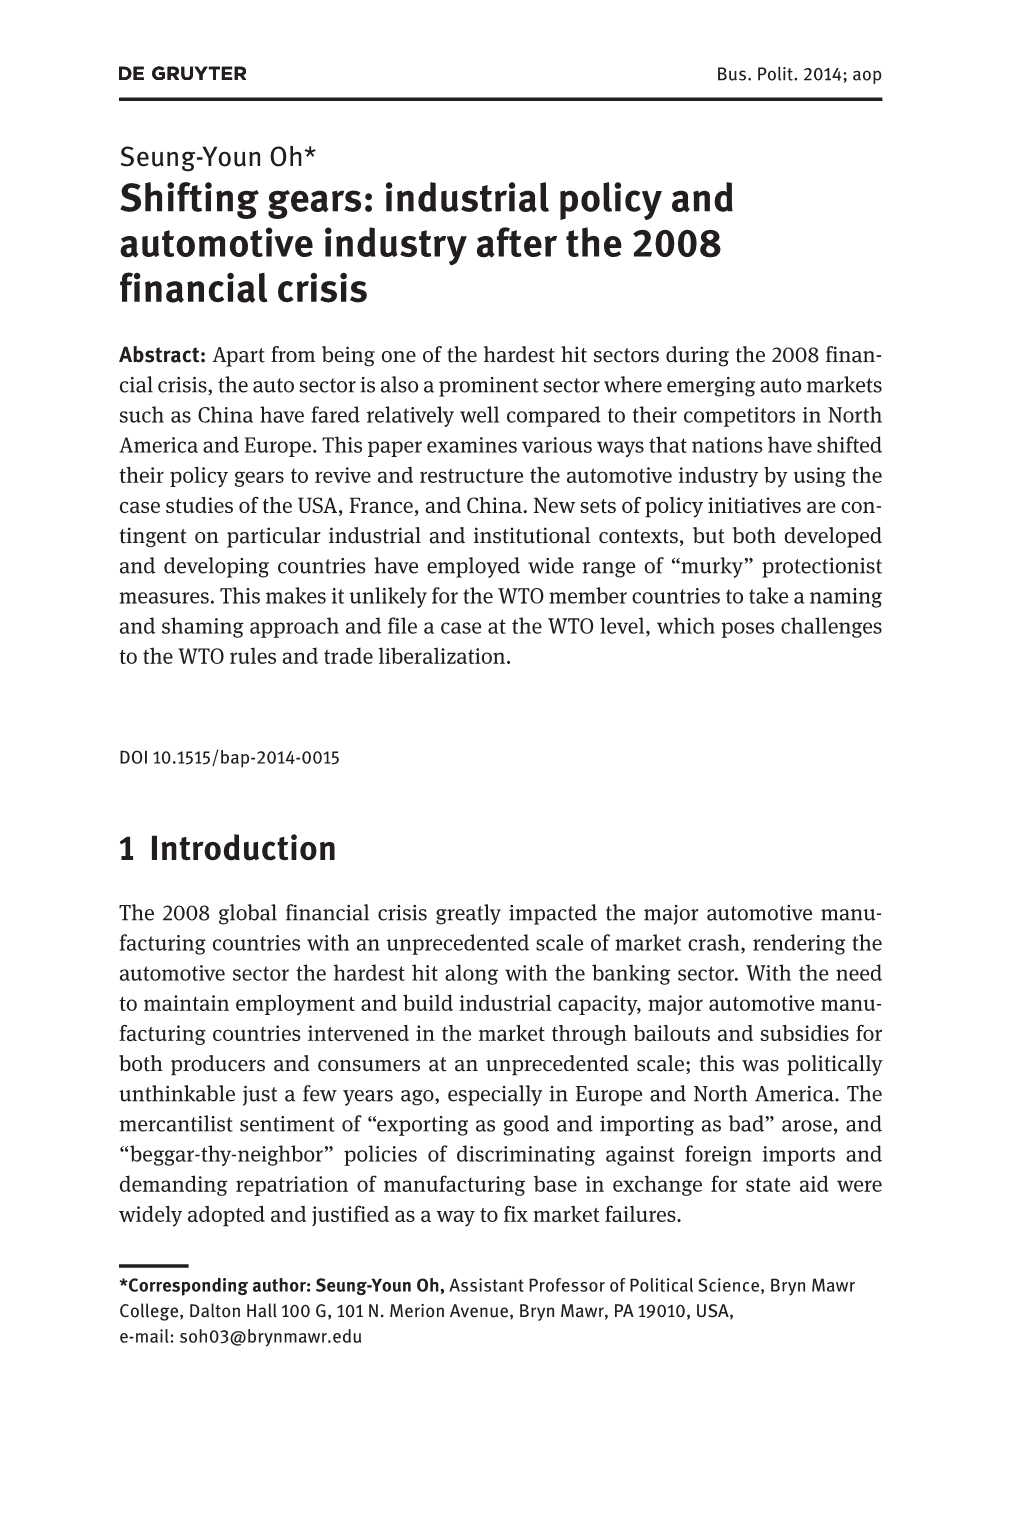 Shifting Gears: Industrial Policy and Automotive Industry After the 2008 Financial Crisis